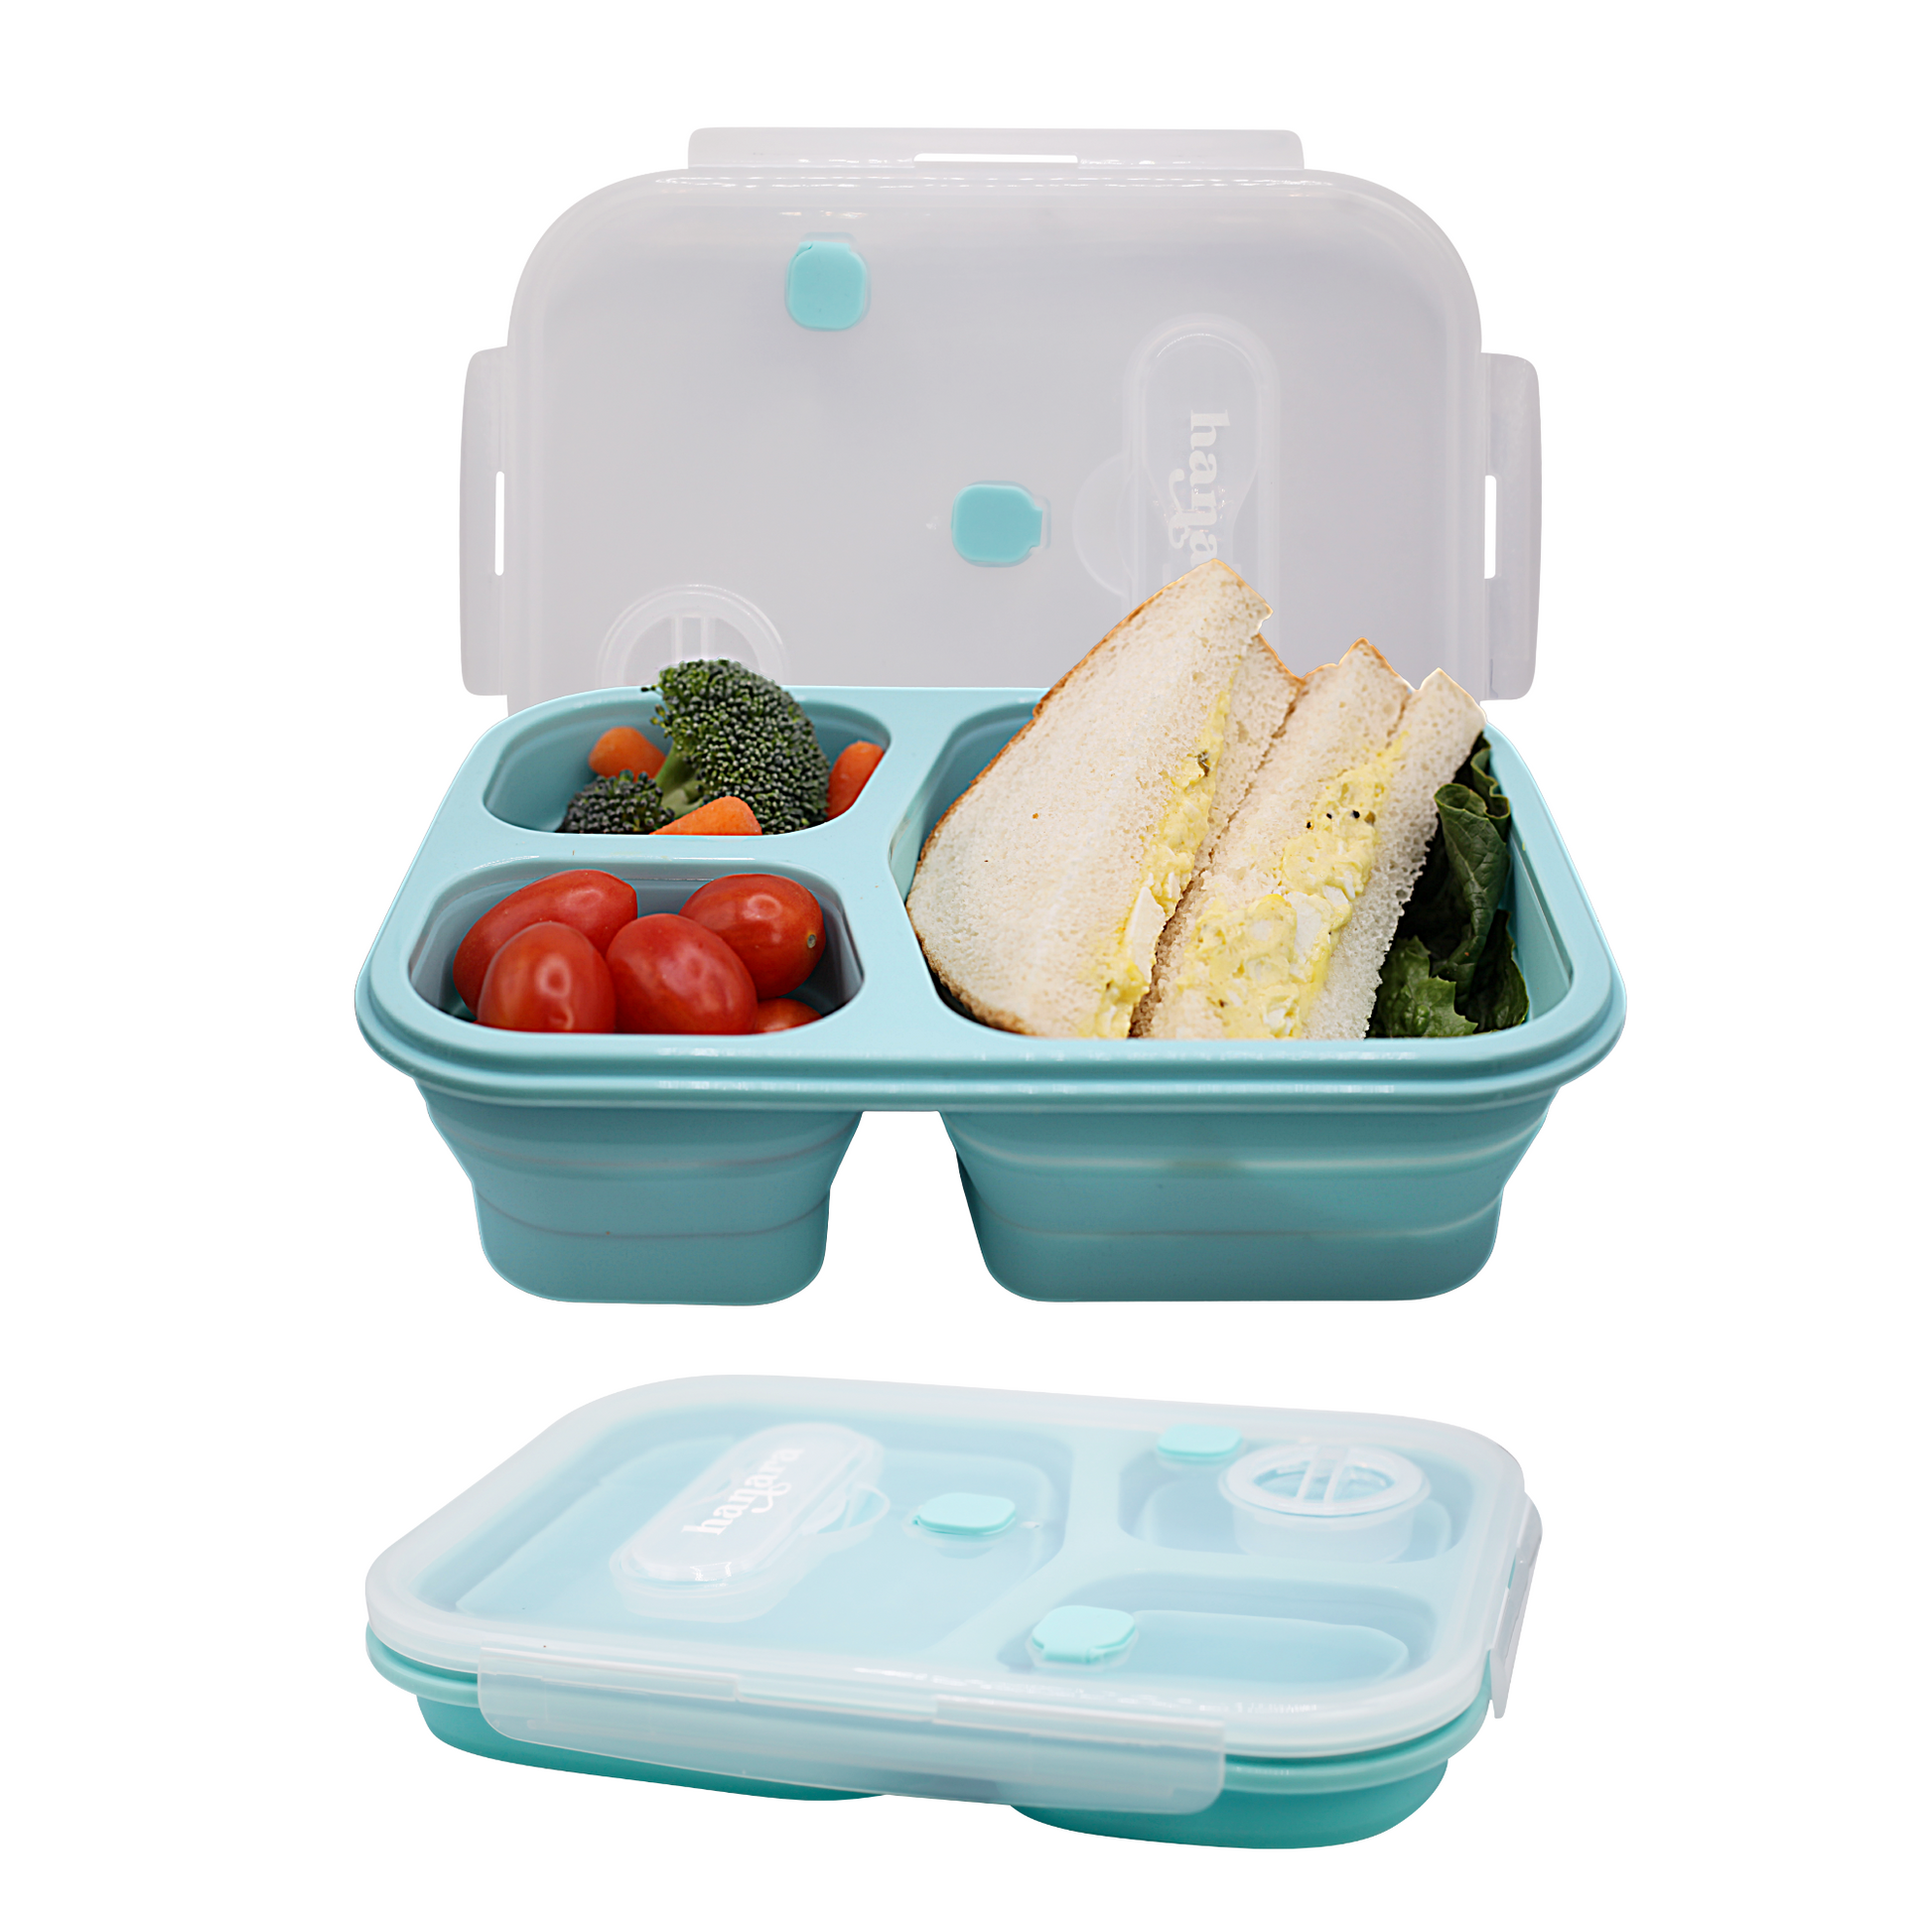 HANARA Collapsible Bento Lunch Box | Large Capacity, 3 Compartments, Sauce  Container, Fork, Spoon | For Travel, Work, School, Out Door Activities 